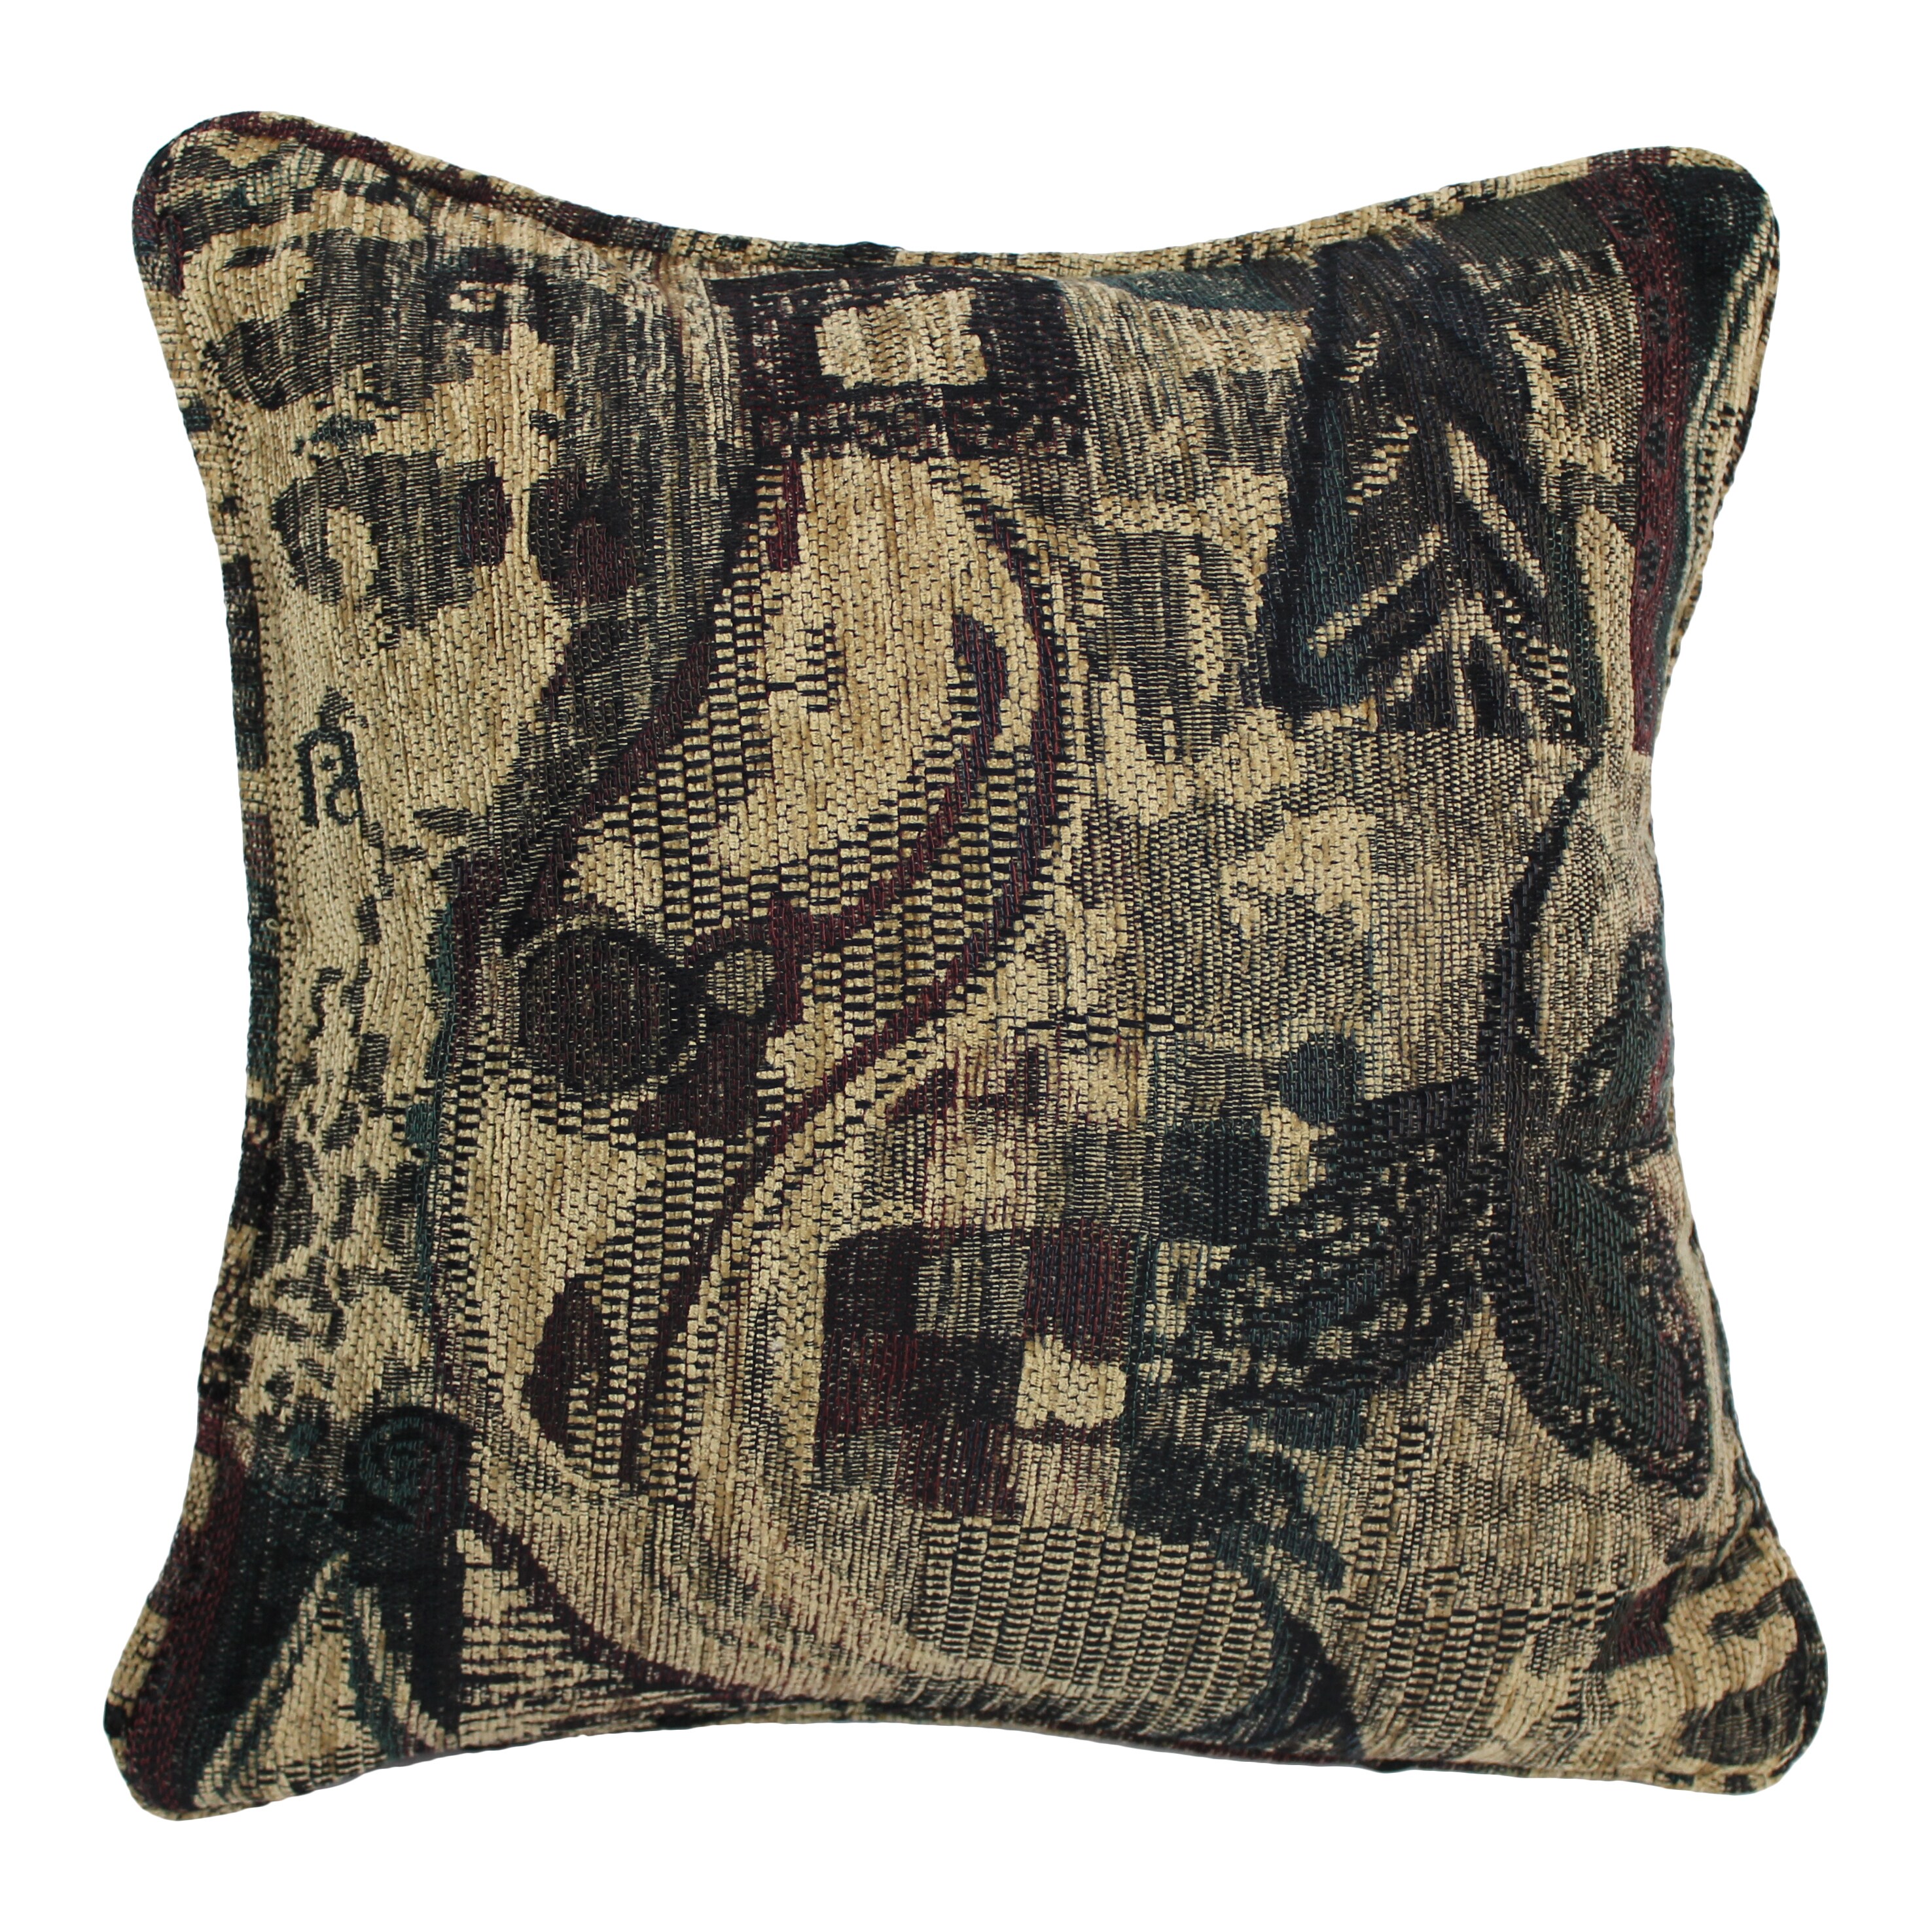 https://ak1.ostkcdn.com/images/products/9740214/Blazing-Needles-18-inch-Antiquity-Jacquard-Chenille-Square-Throw-Pillow-with-Insert-ccb53ec6-8e1e-4582-bf7c-fa8af37e72d2.jpg